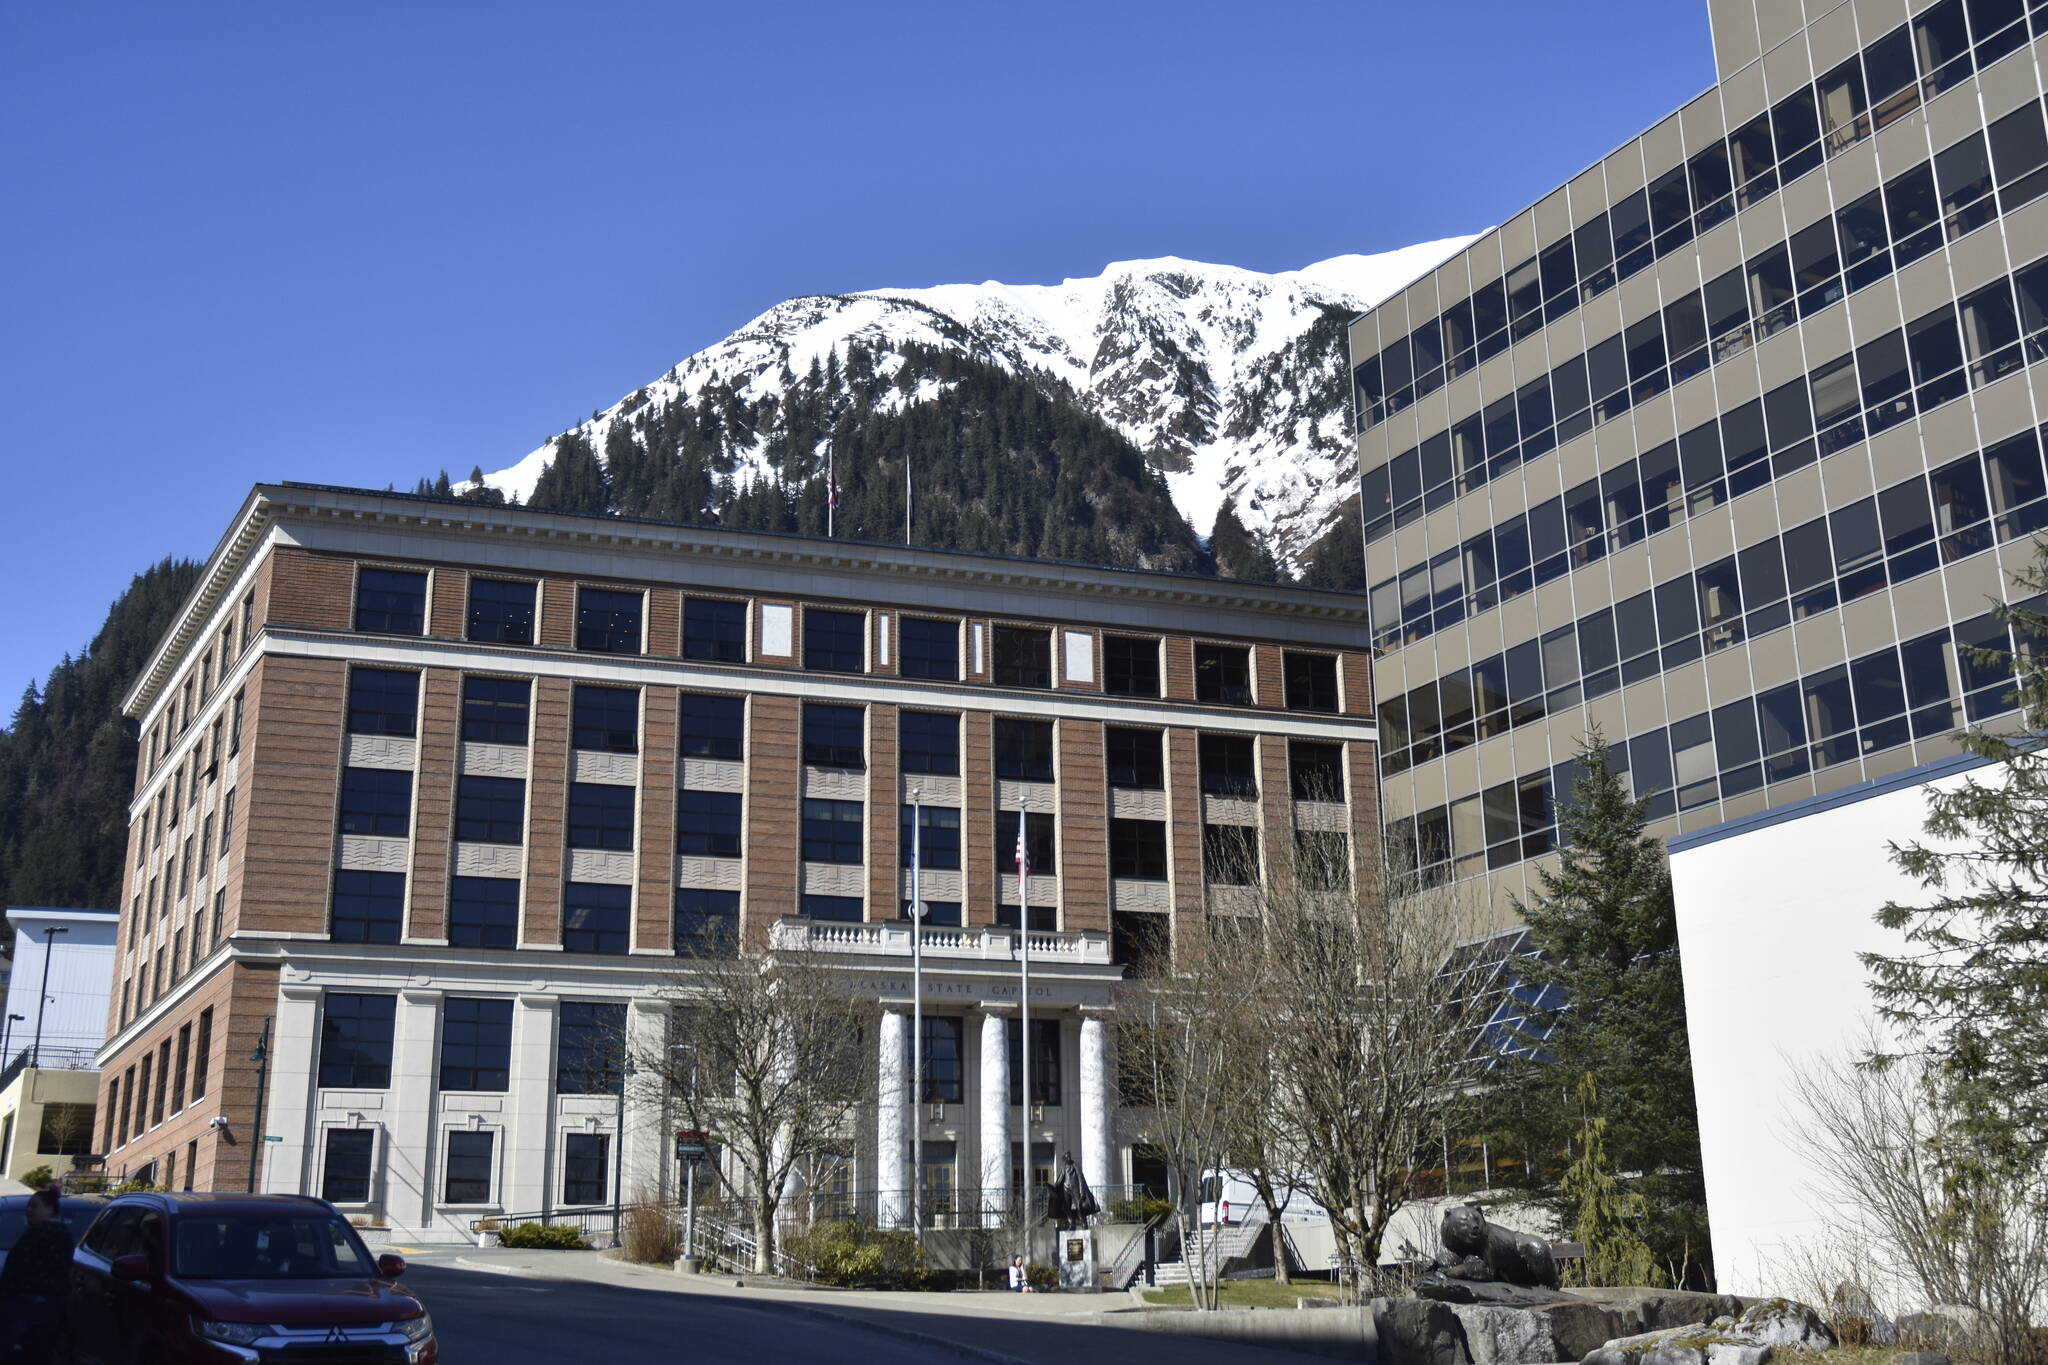 The Alaska House of Representatives passed a bill reducing sentences for and clearing records for marijuana possession on Wednesday, April 20, 2022, a day adopted as an unofficial holiday by cannabis users. The maker of the bill said the timing was not intended. (Peter Segall / Juneau Empire)